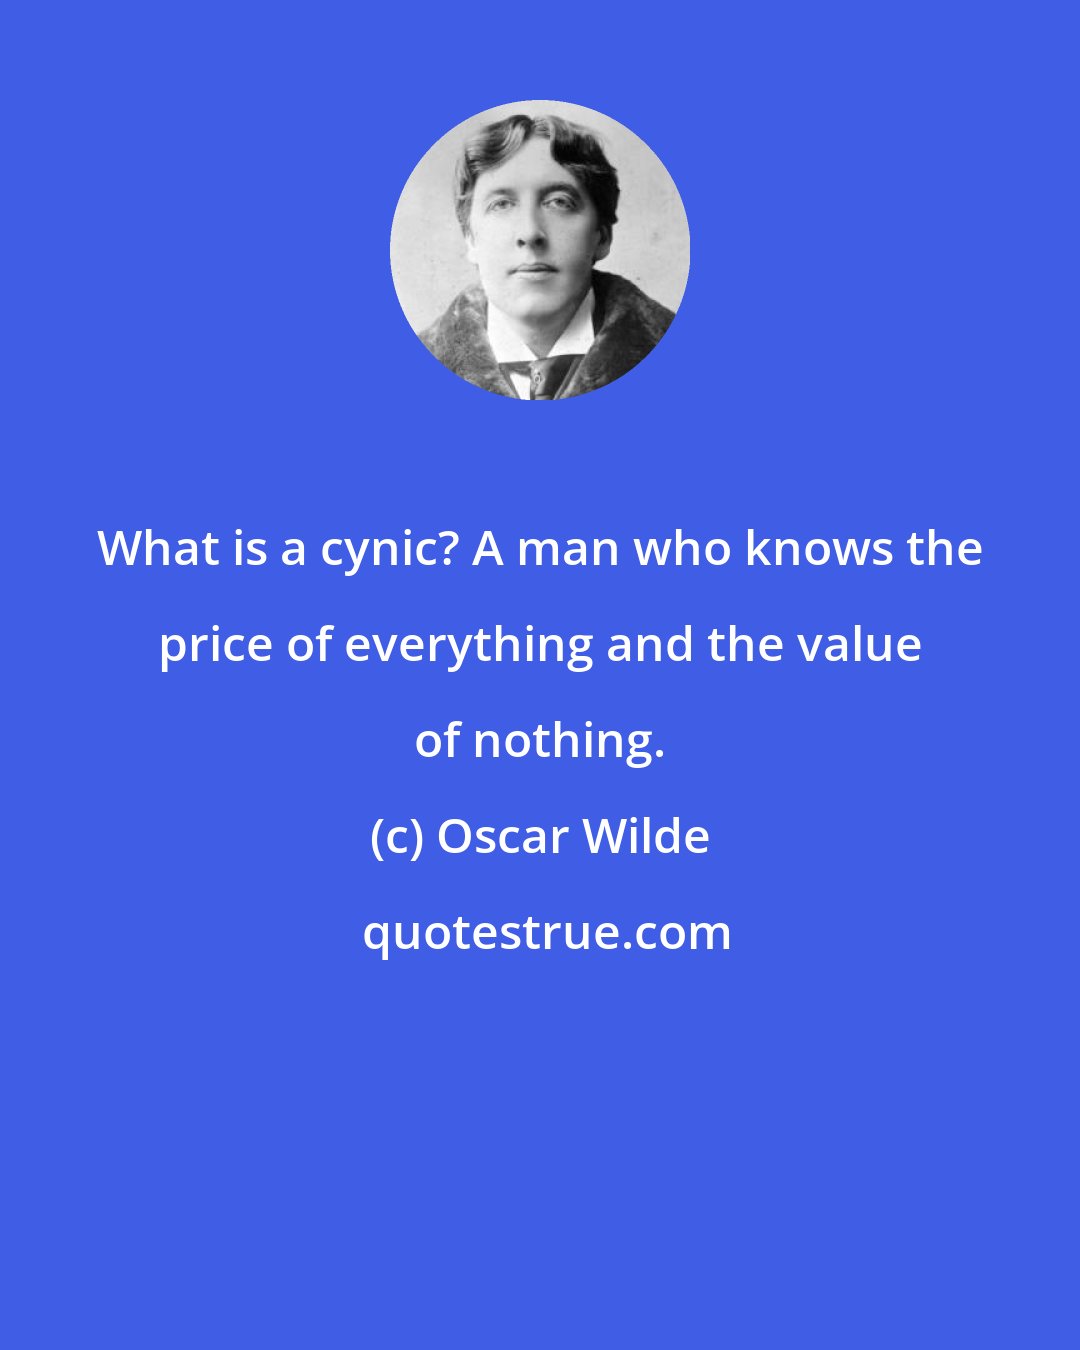 Oscar Wilde: What is a cynic? A man who knows the price of everything and the value of nothing.